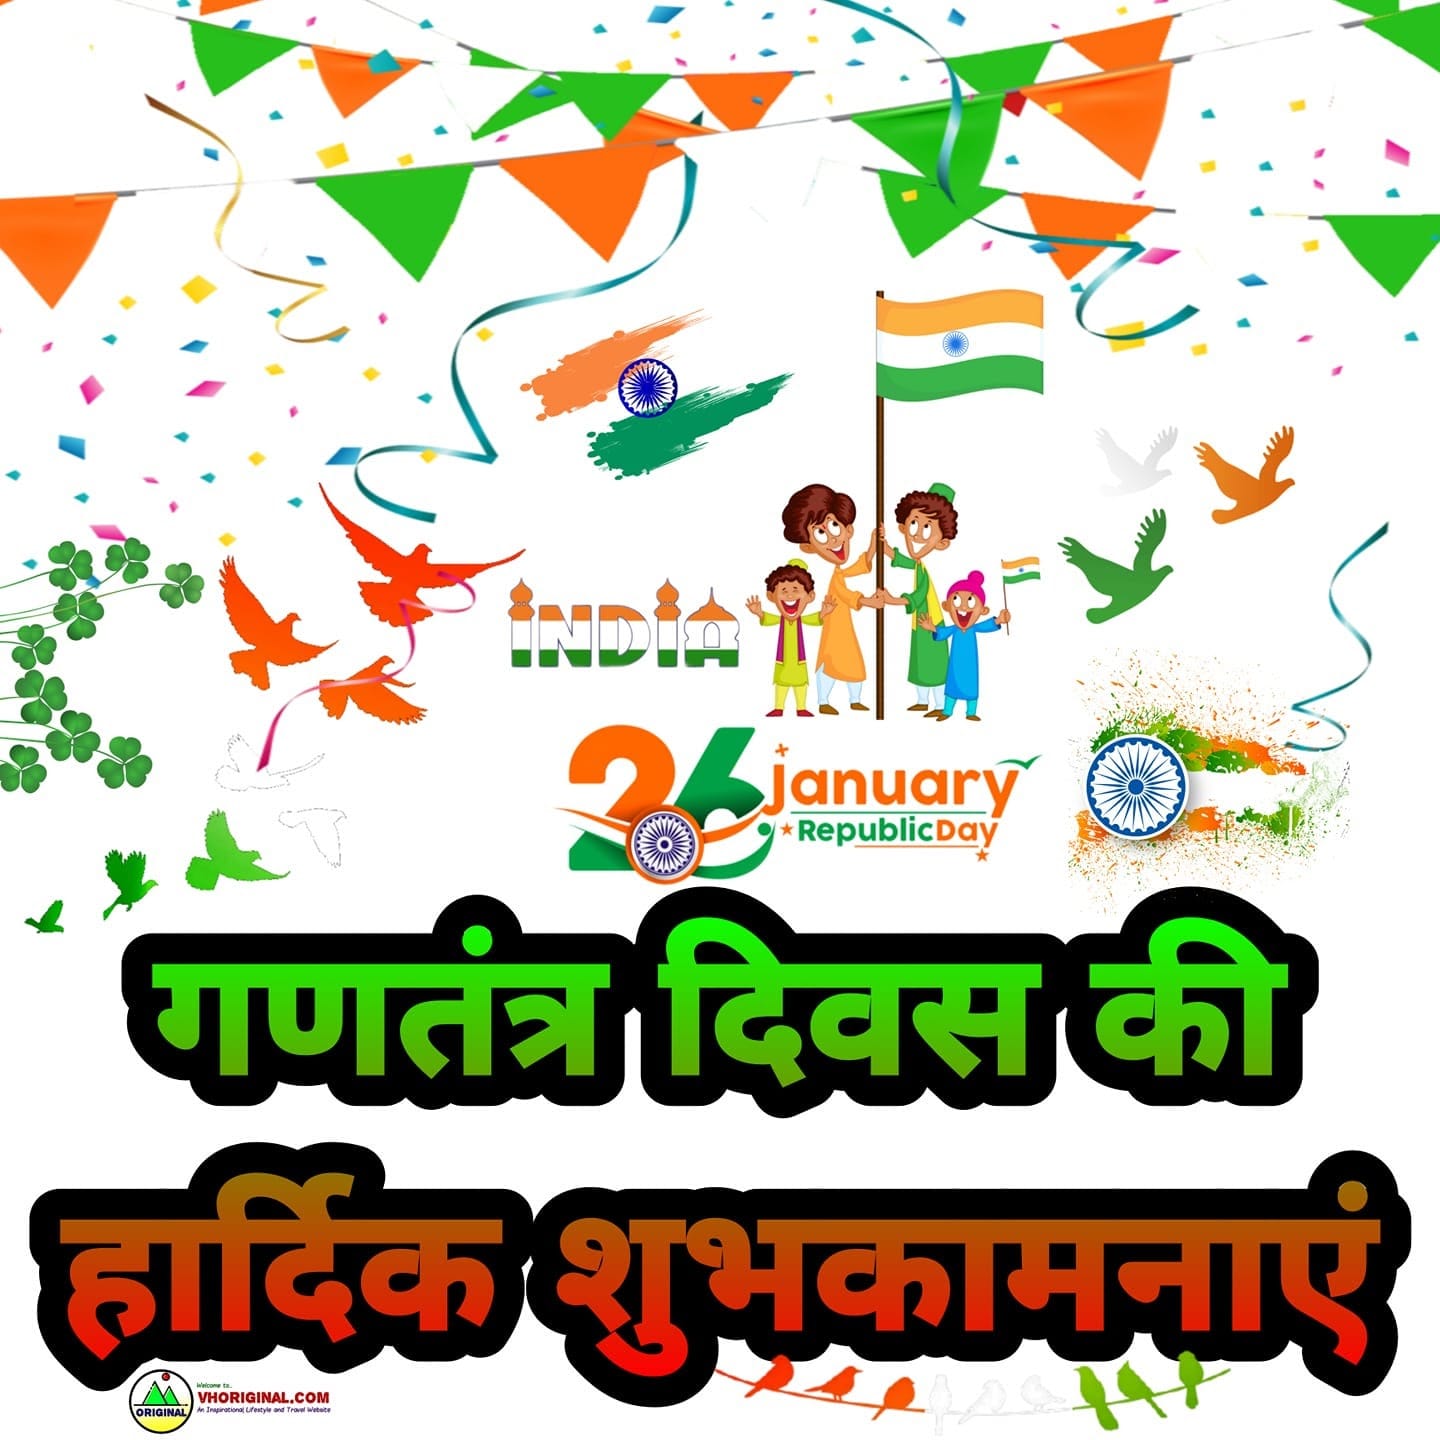 Happy Republic Day wishes images Photos wallpaper